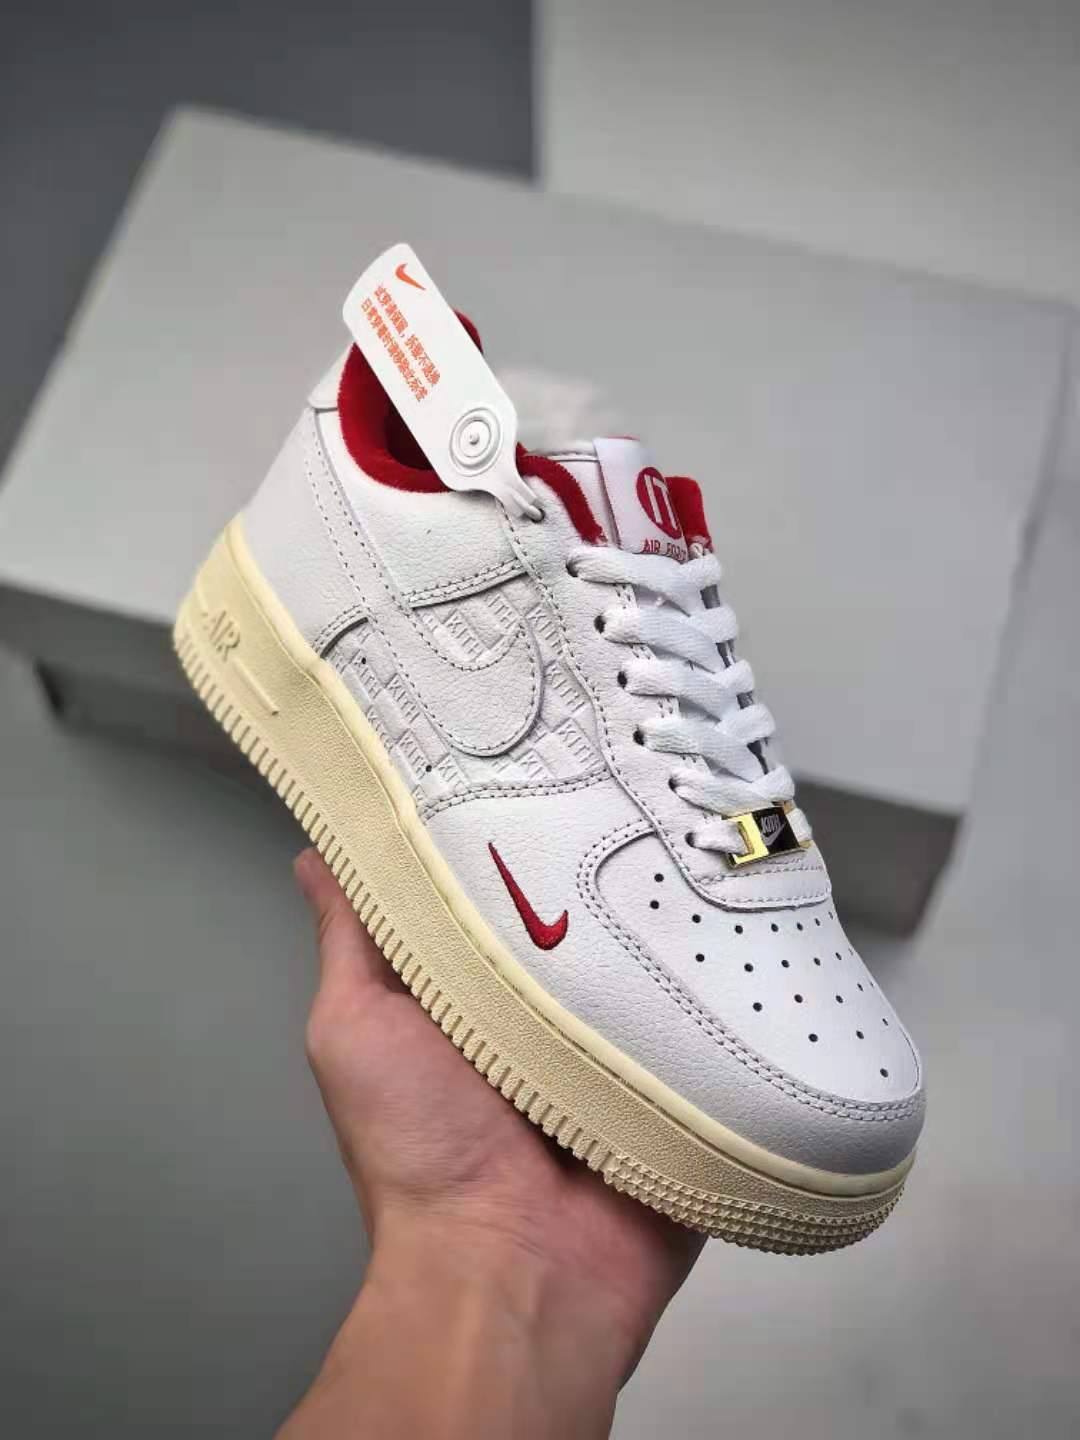 Nike KITH x Air Force 1 Low 'Tokyo' CZ7926-100 - Exclusive Collaboration with Distinctive Design